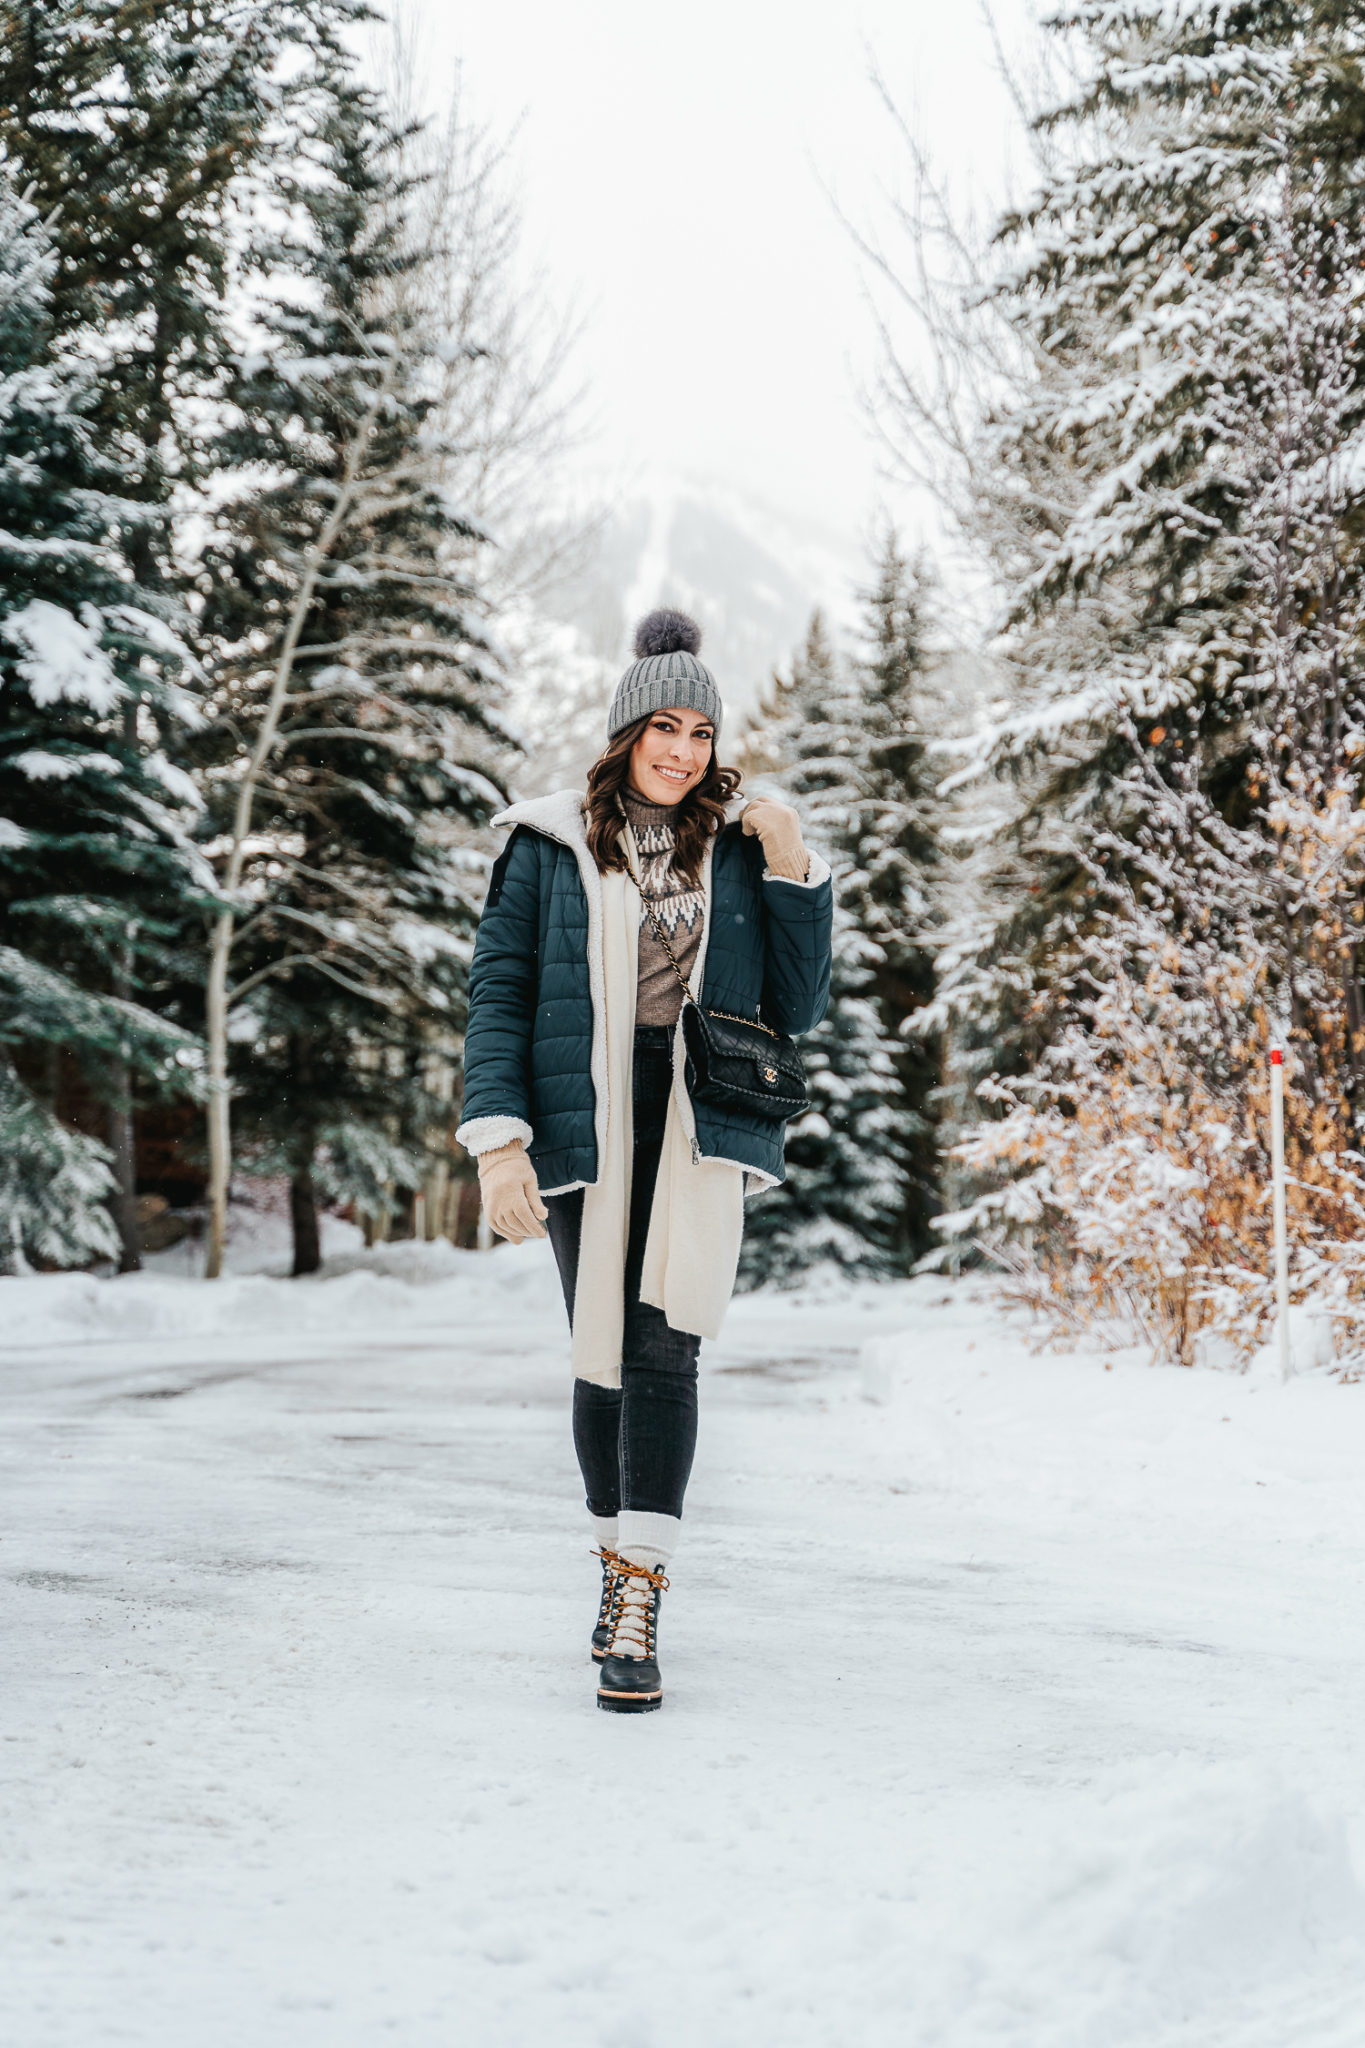 How to wear a shearling jacket in winter